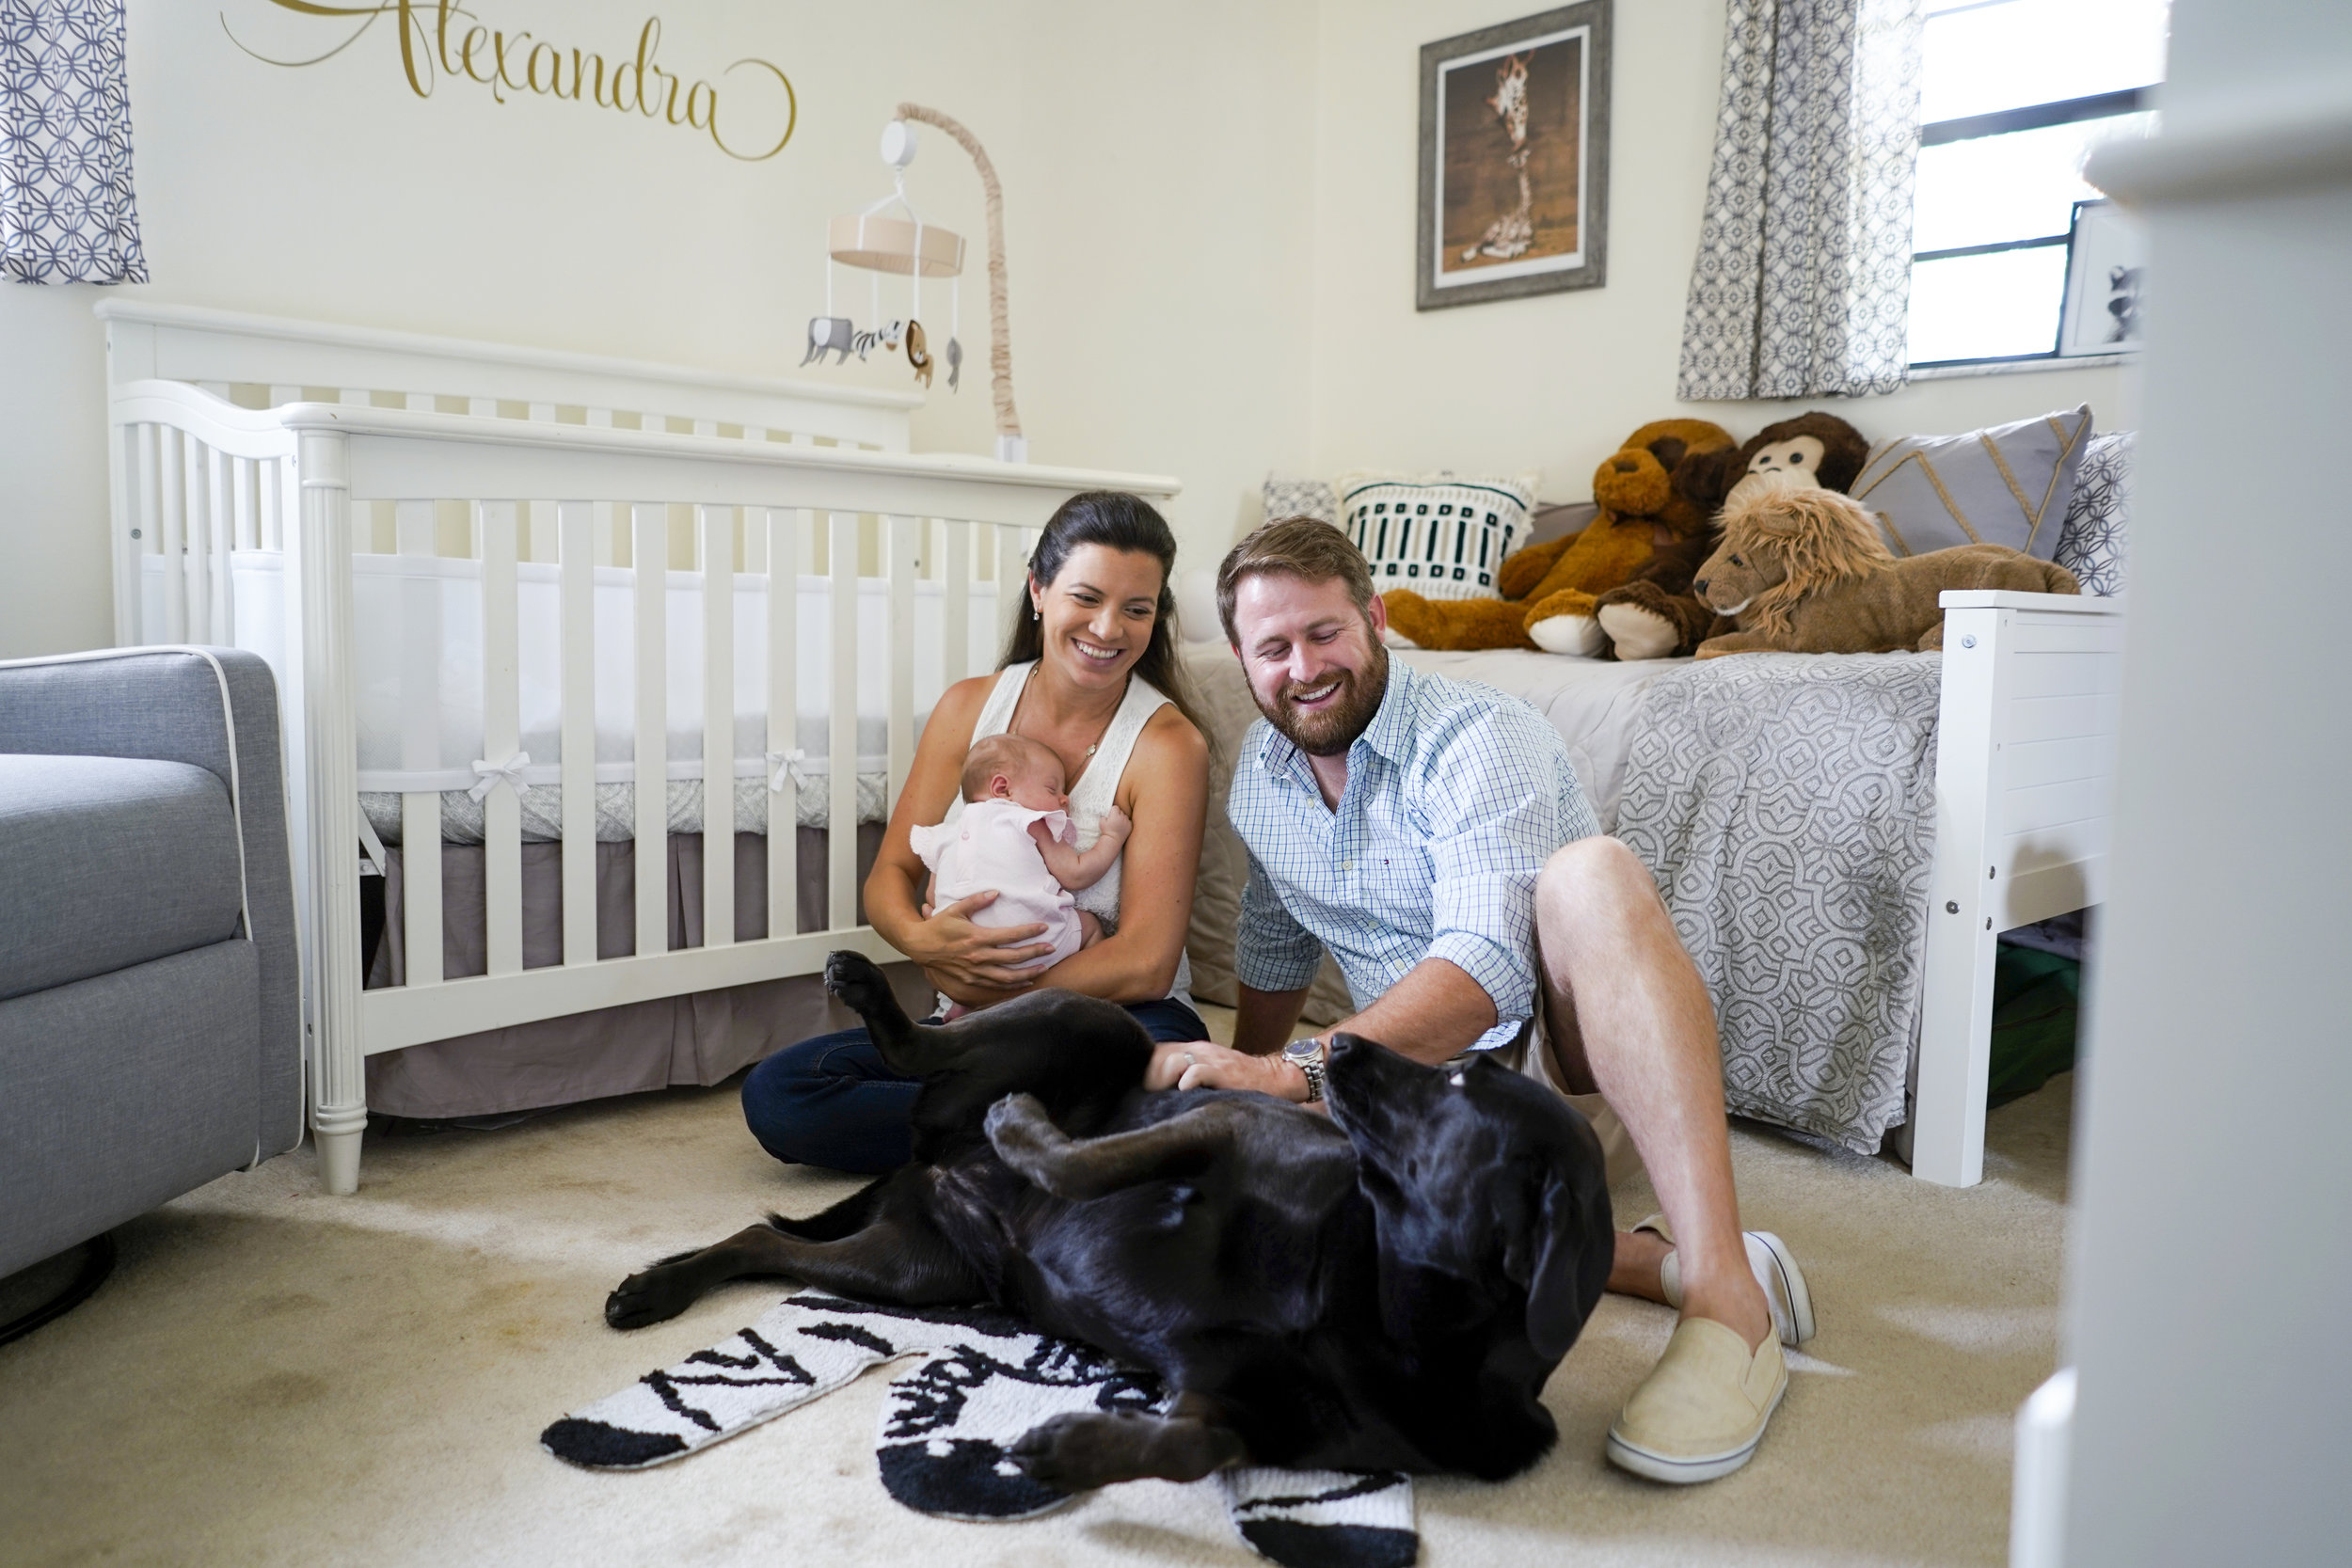  “Tammi was recommended to me by a friend and I’m so happy she did. Tammi took my daughter’s newborn photos at our home several months ago and we loved them! Even our dog and cat felt comfortable around her. Most recently she took family photos for u